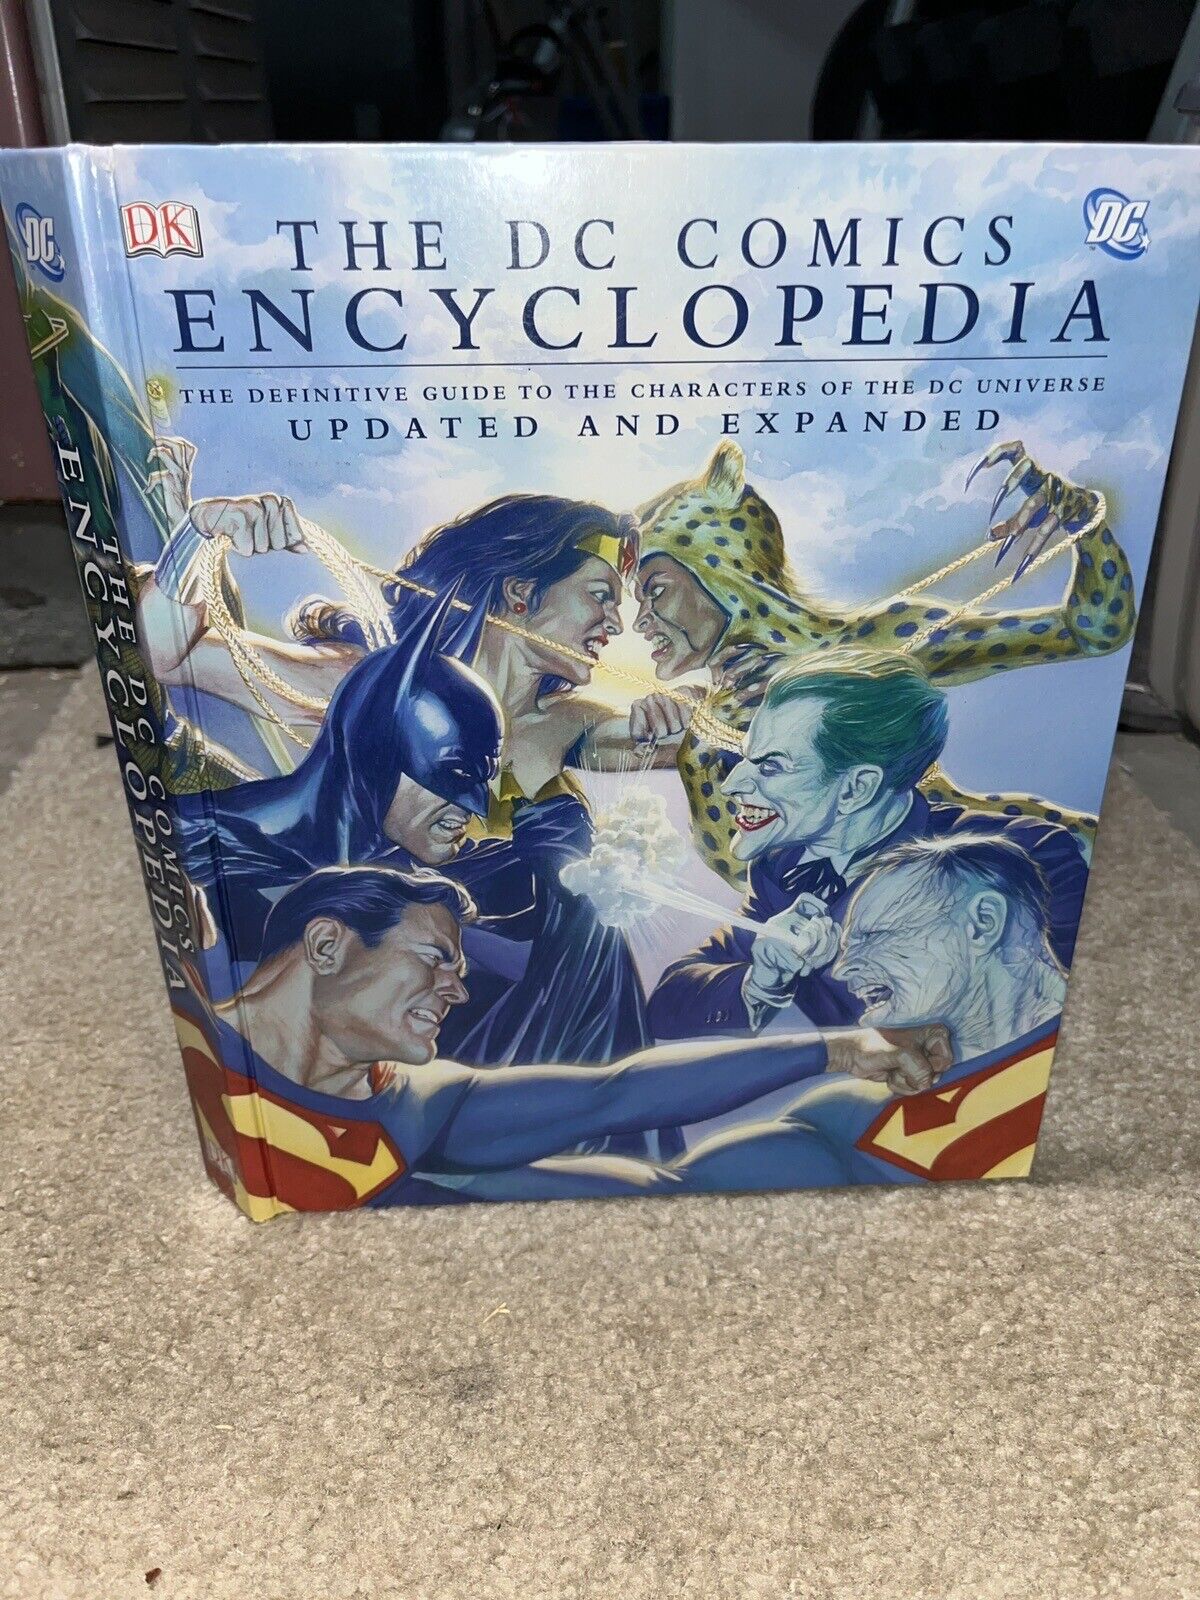 The DC Comics Encyclopedia: The Definitive Guide To The Characters Of DC